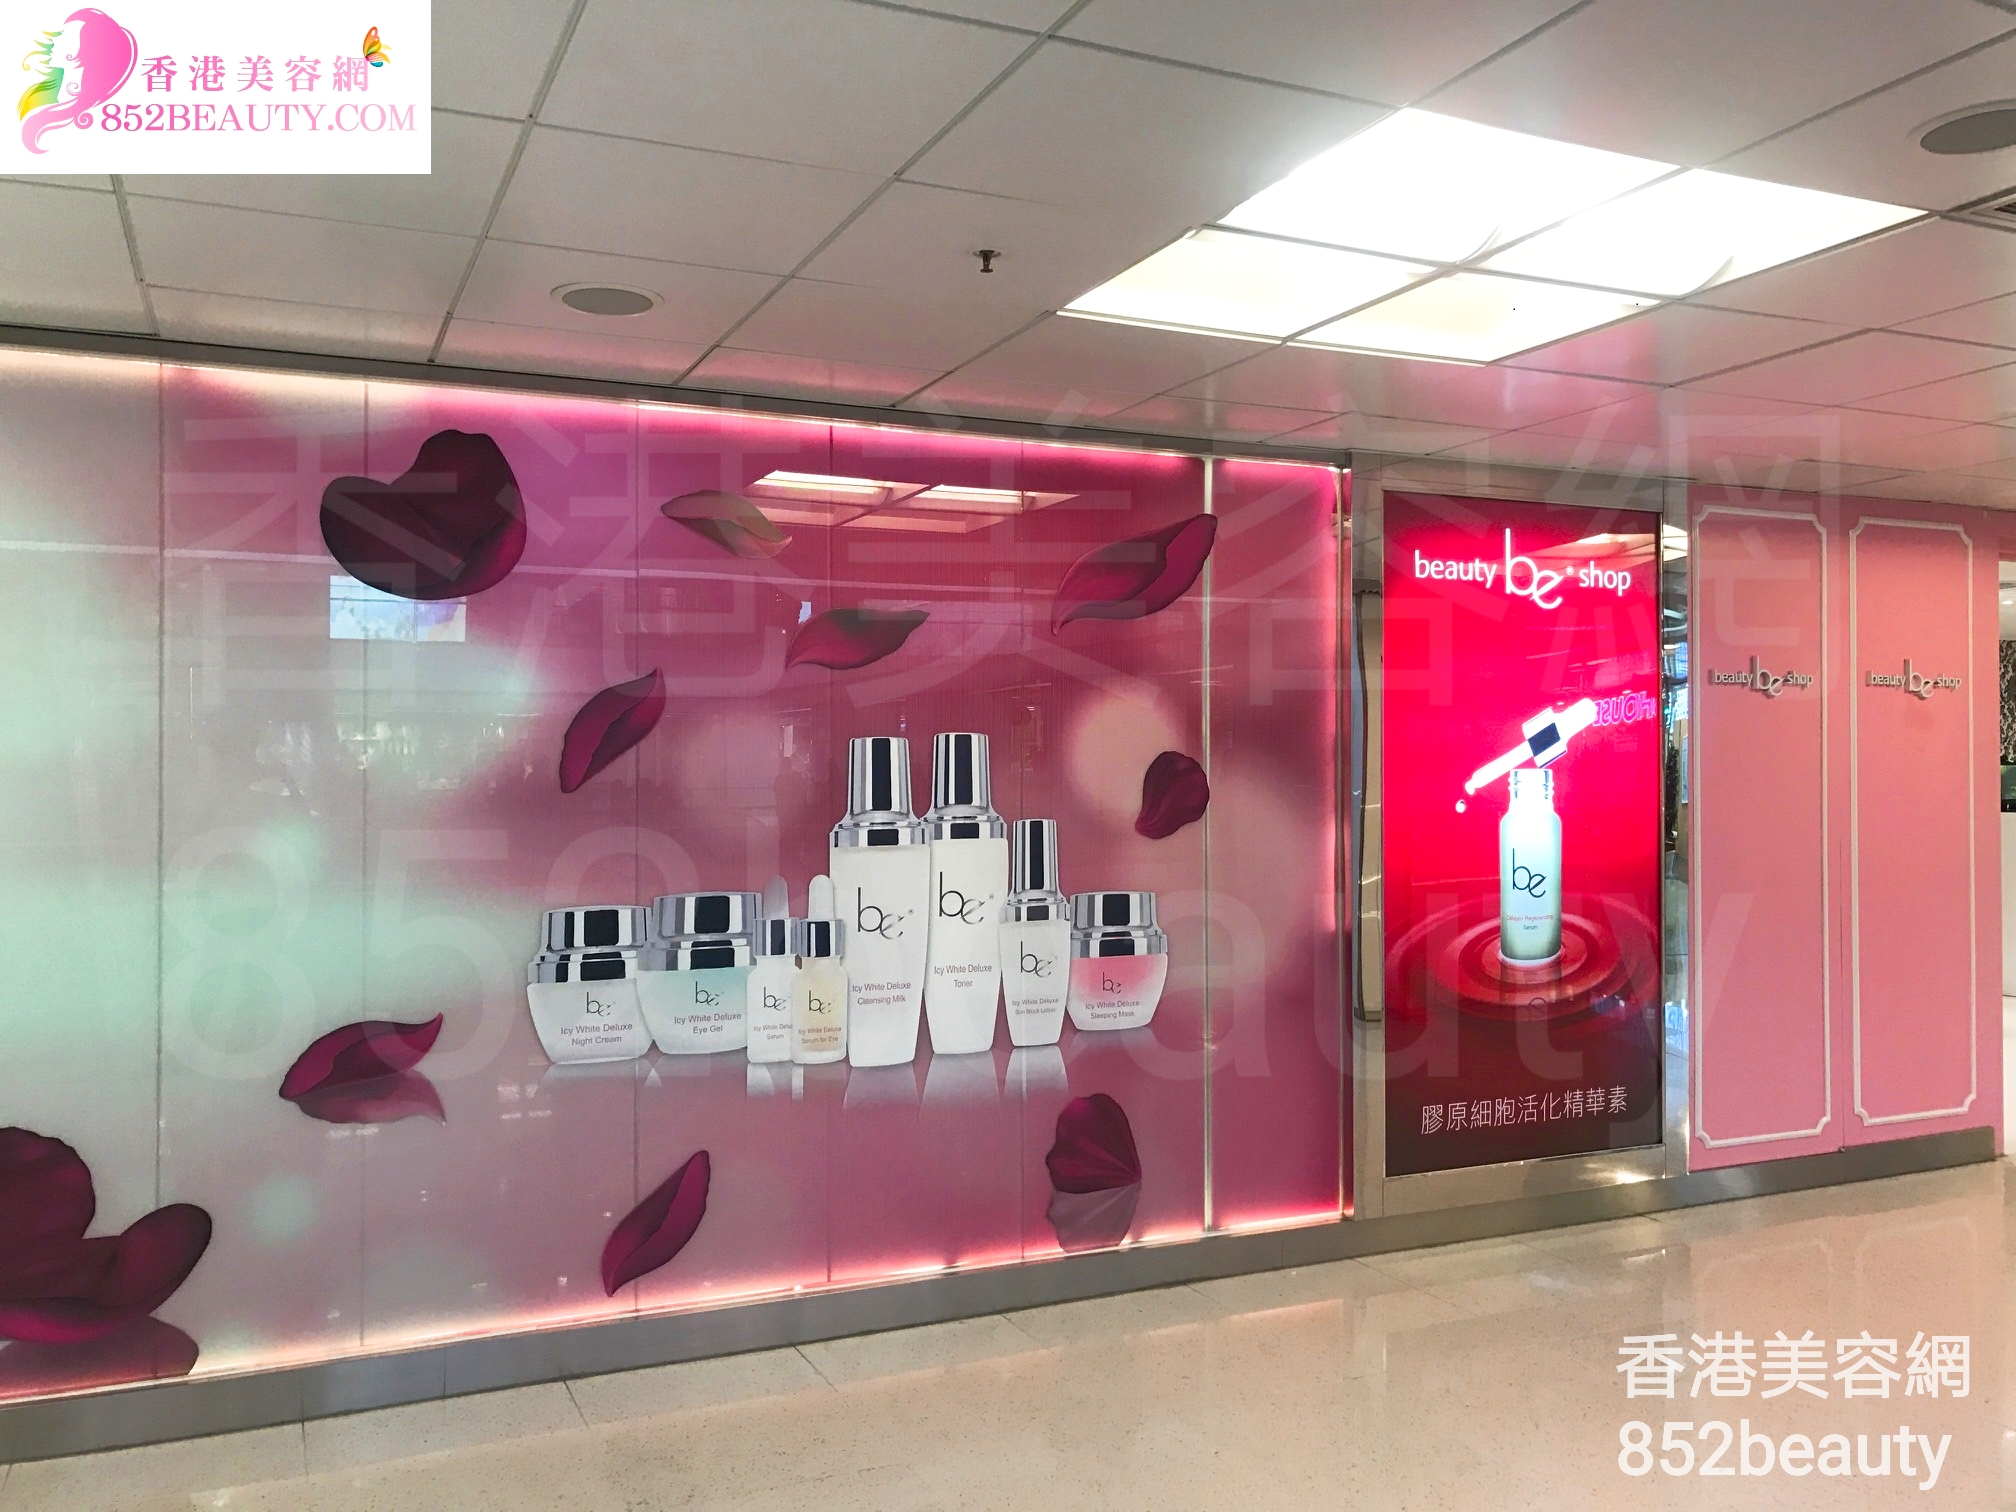 Hand and foot care: be beauty shop (葵涌廣場)